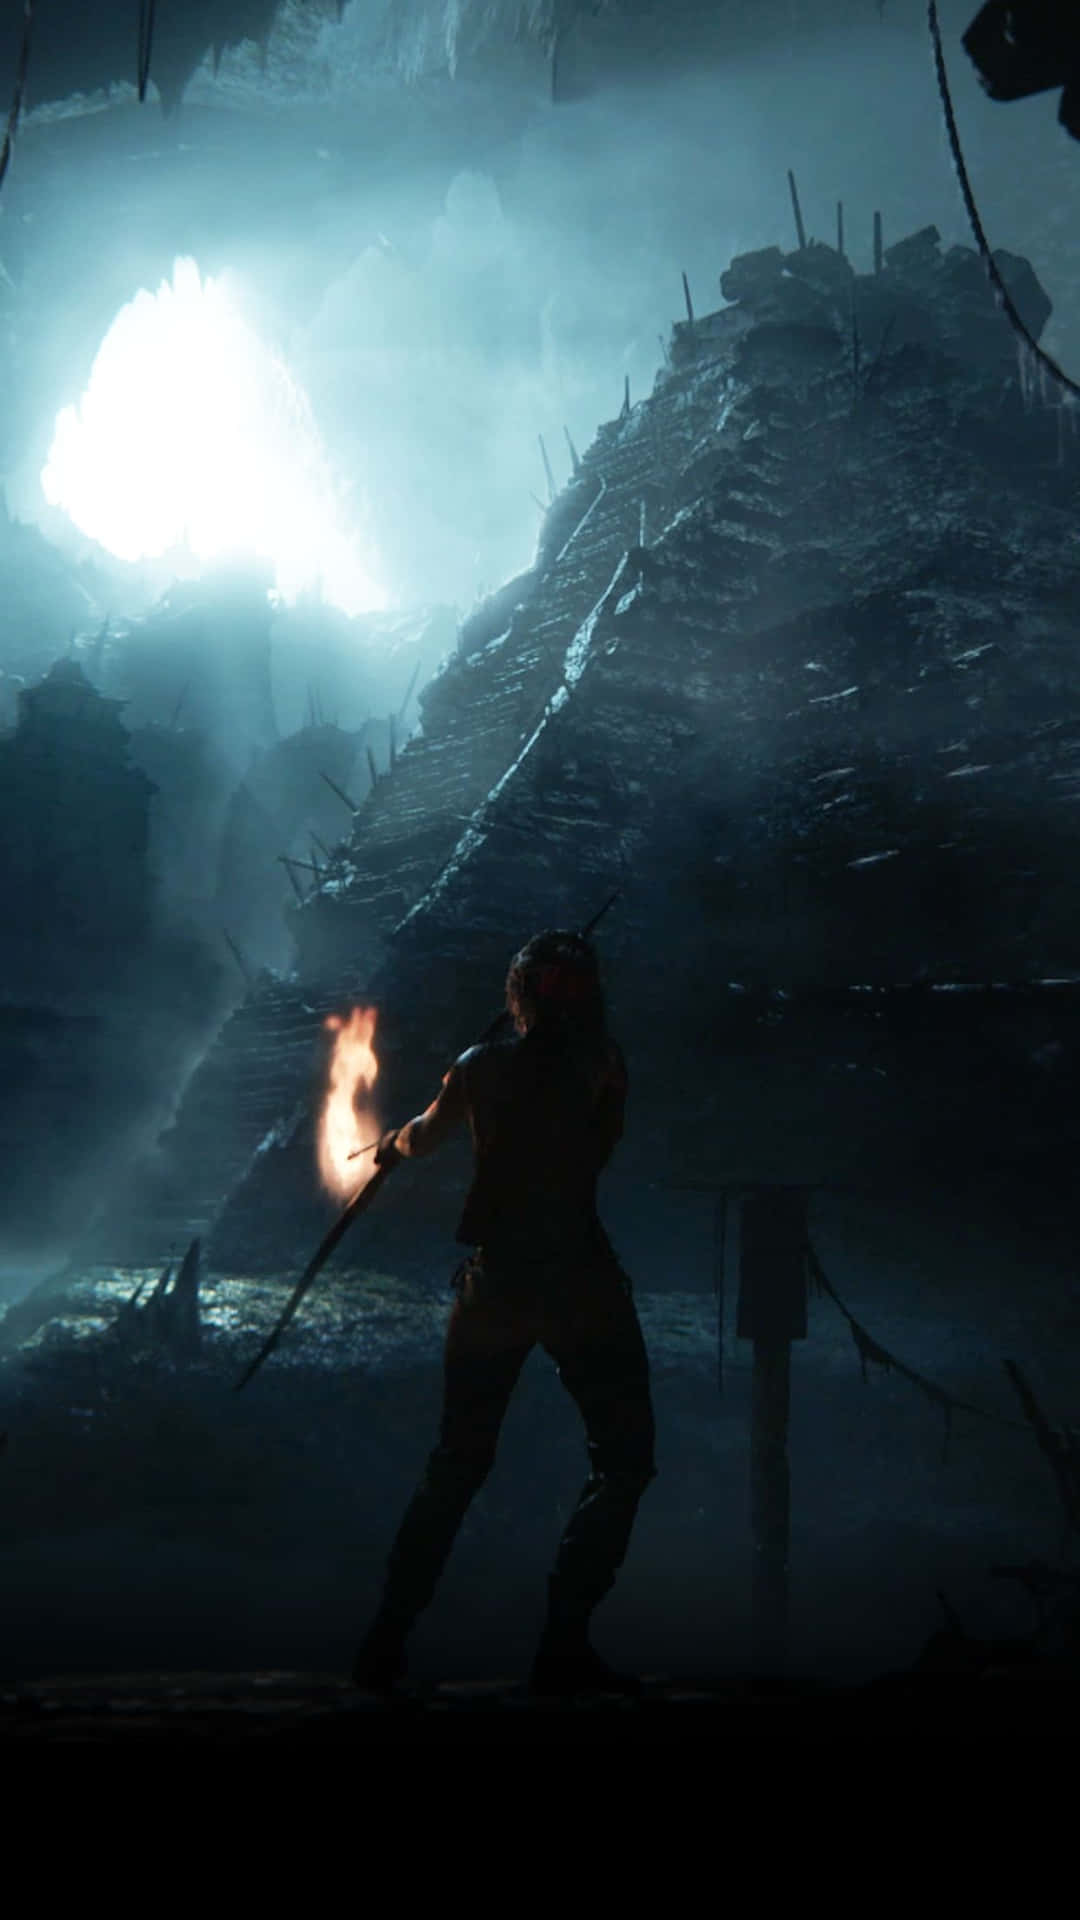 Discover the power of Lara Croft in Shadow of the Tomb Raider